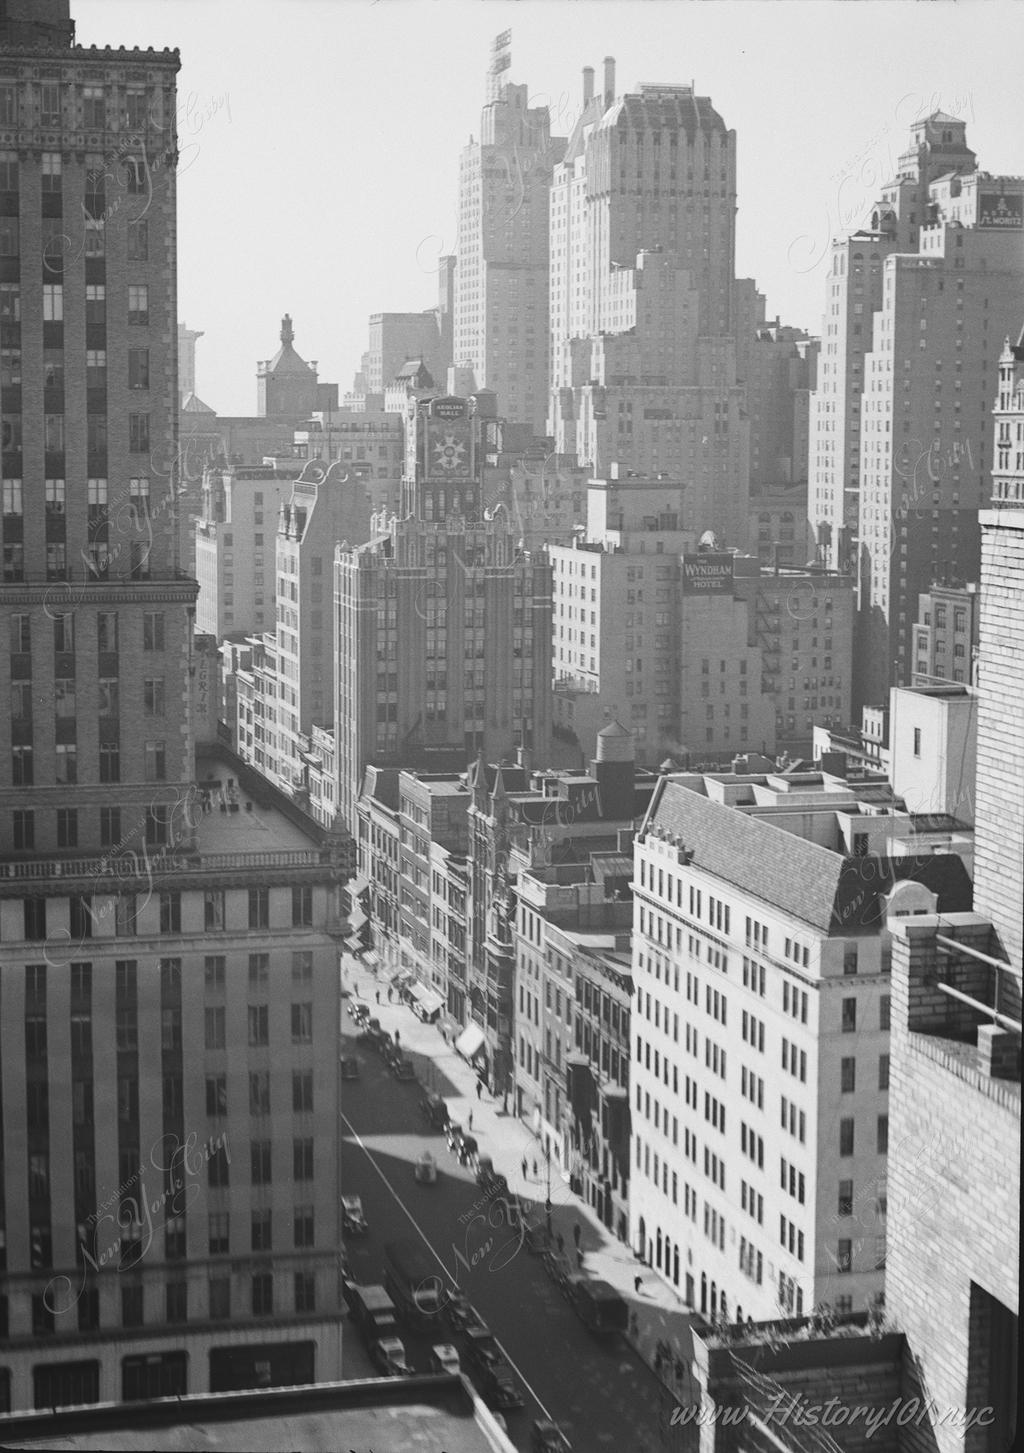 View looking west on 57th Street from Fifth Avenue. We see the south facade of the iconic Bergdorf Goodman building and the smaller buildings on the north side of 57th Street.